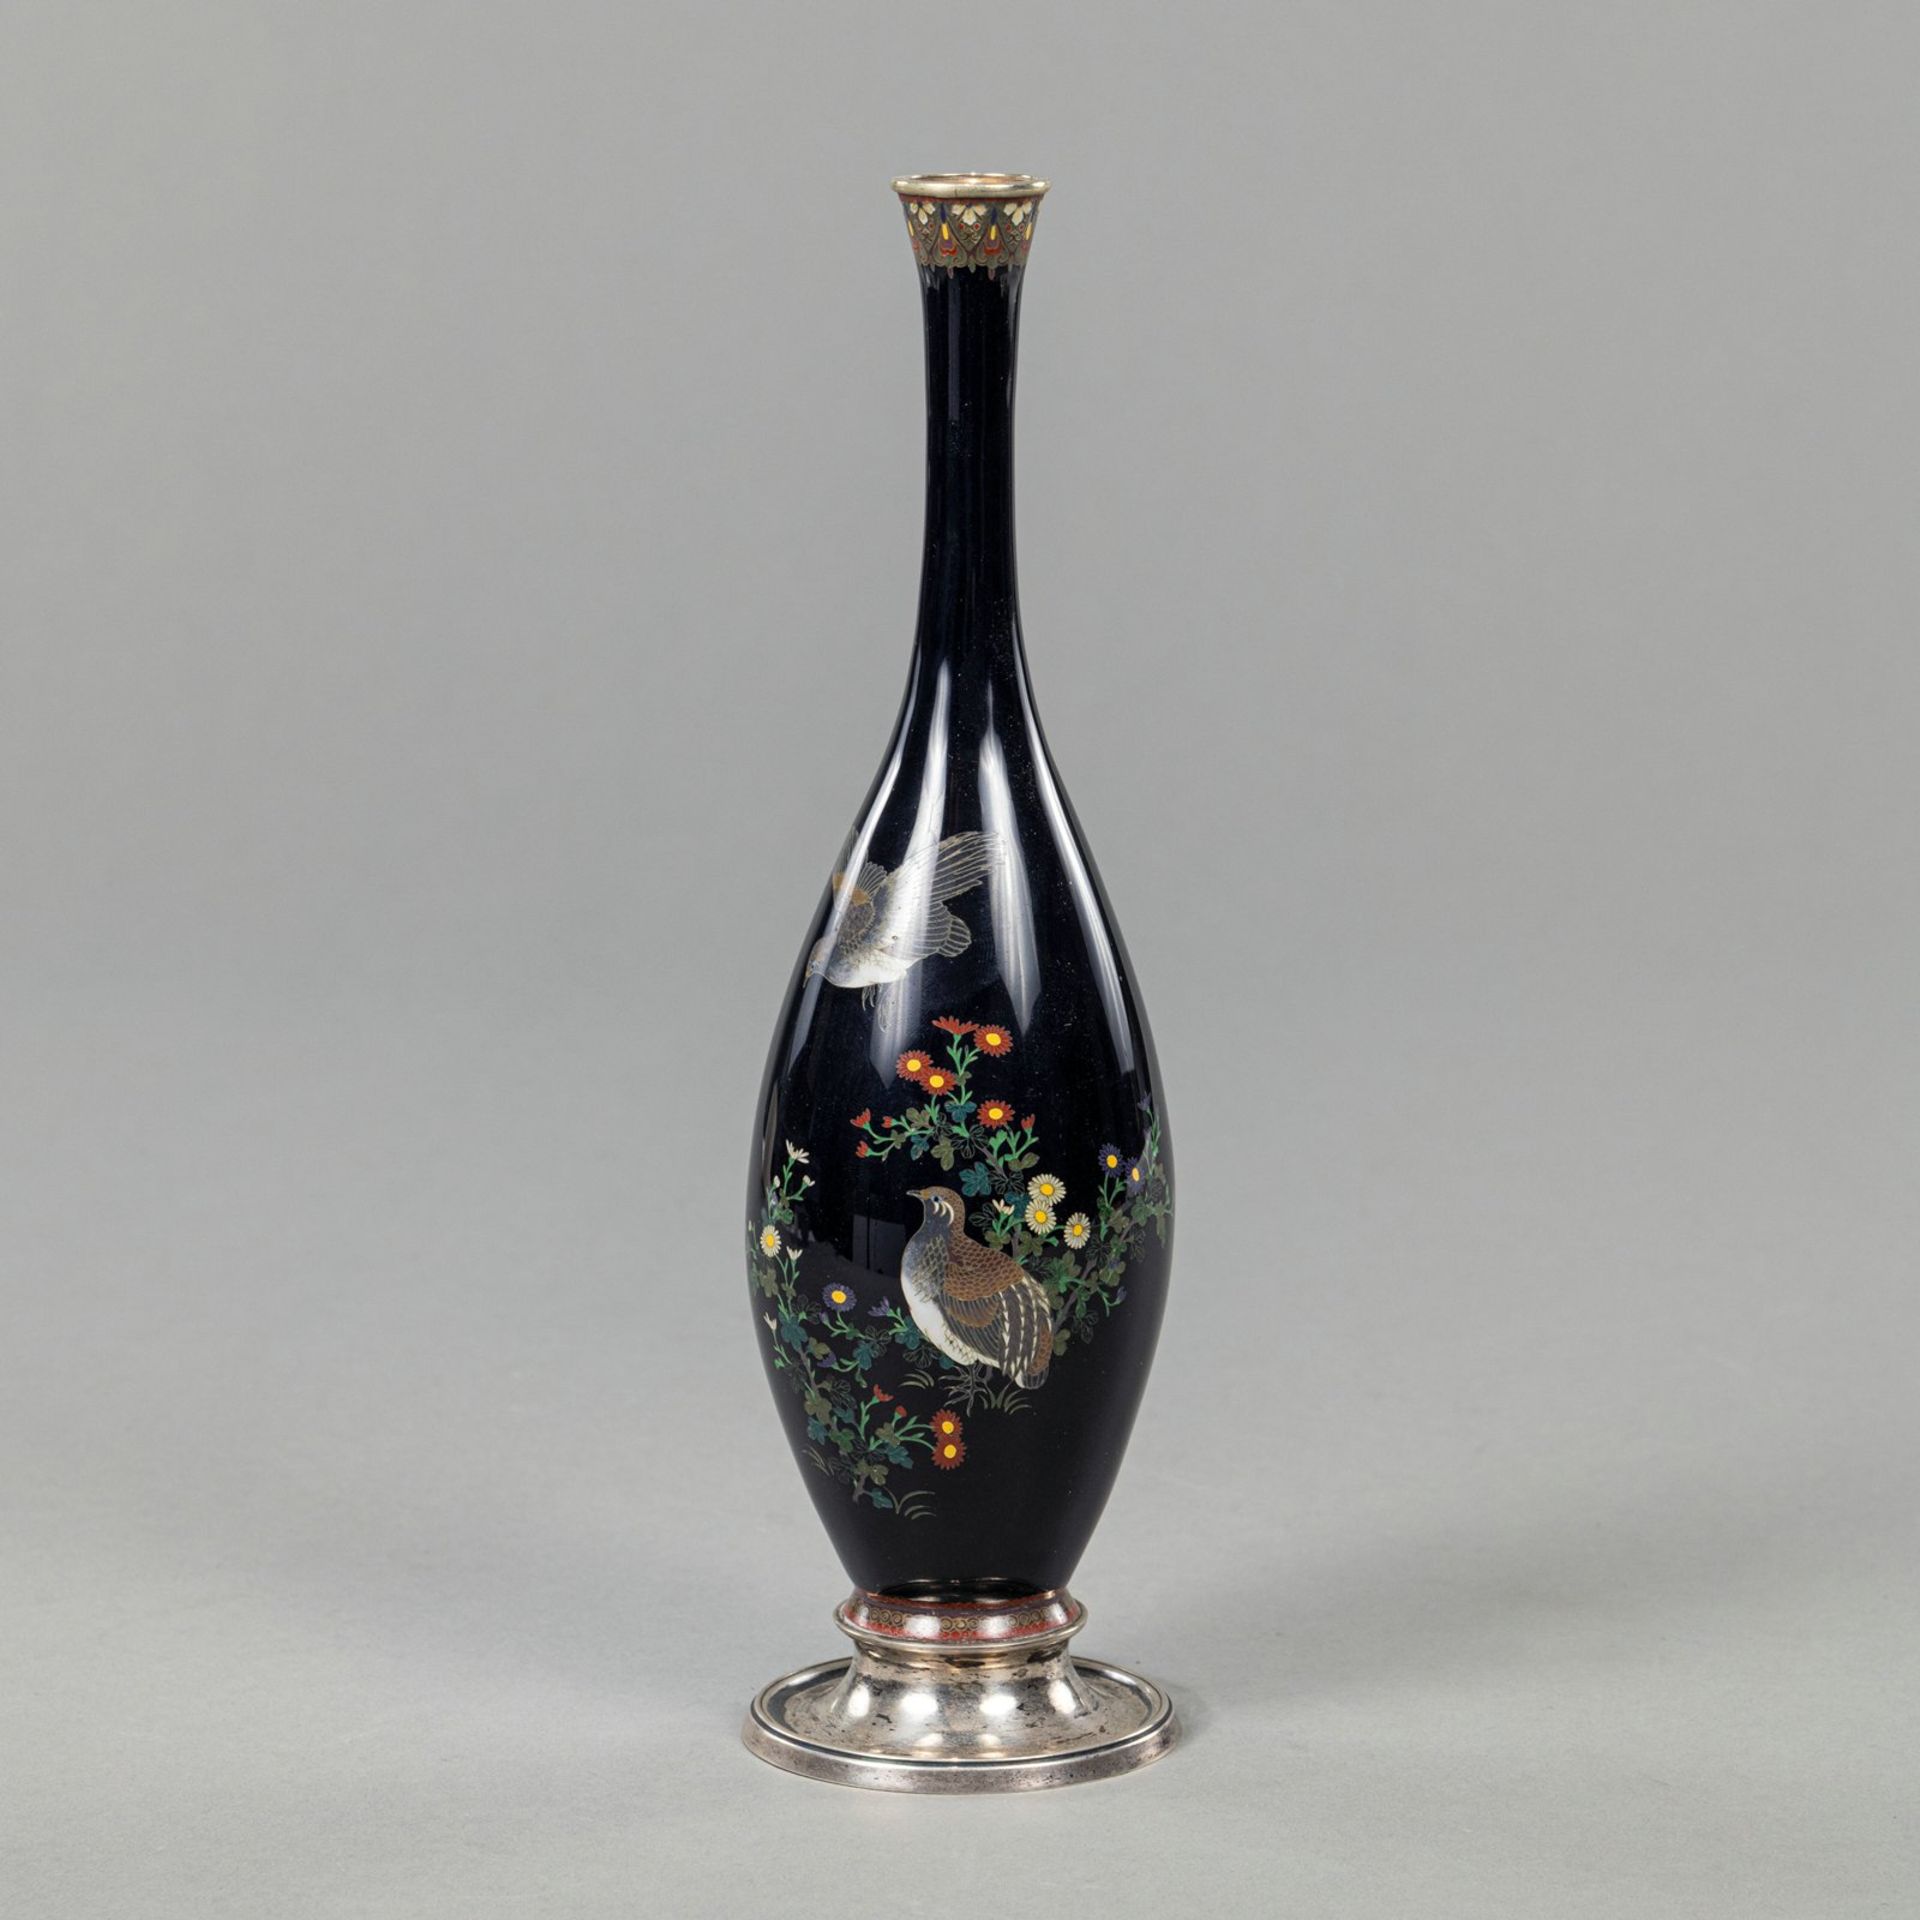 A CLOISONNÉ ENAMEL VASE DECORATED WITH A PAIR OF QUAILS ON DARK BLUE GROUND